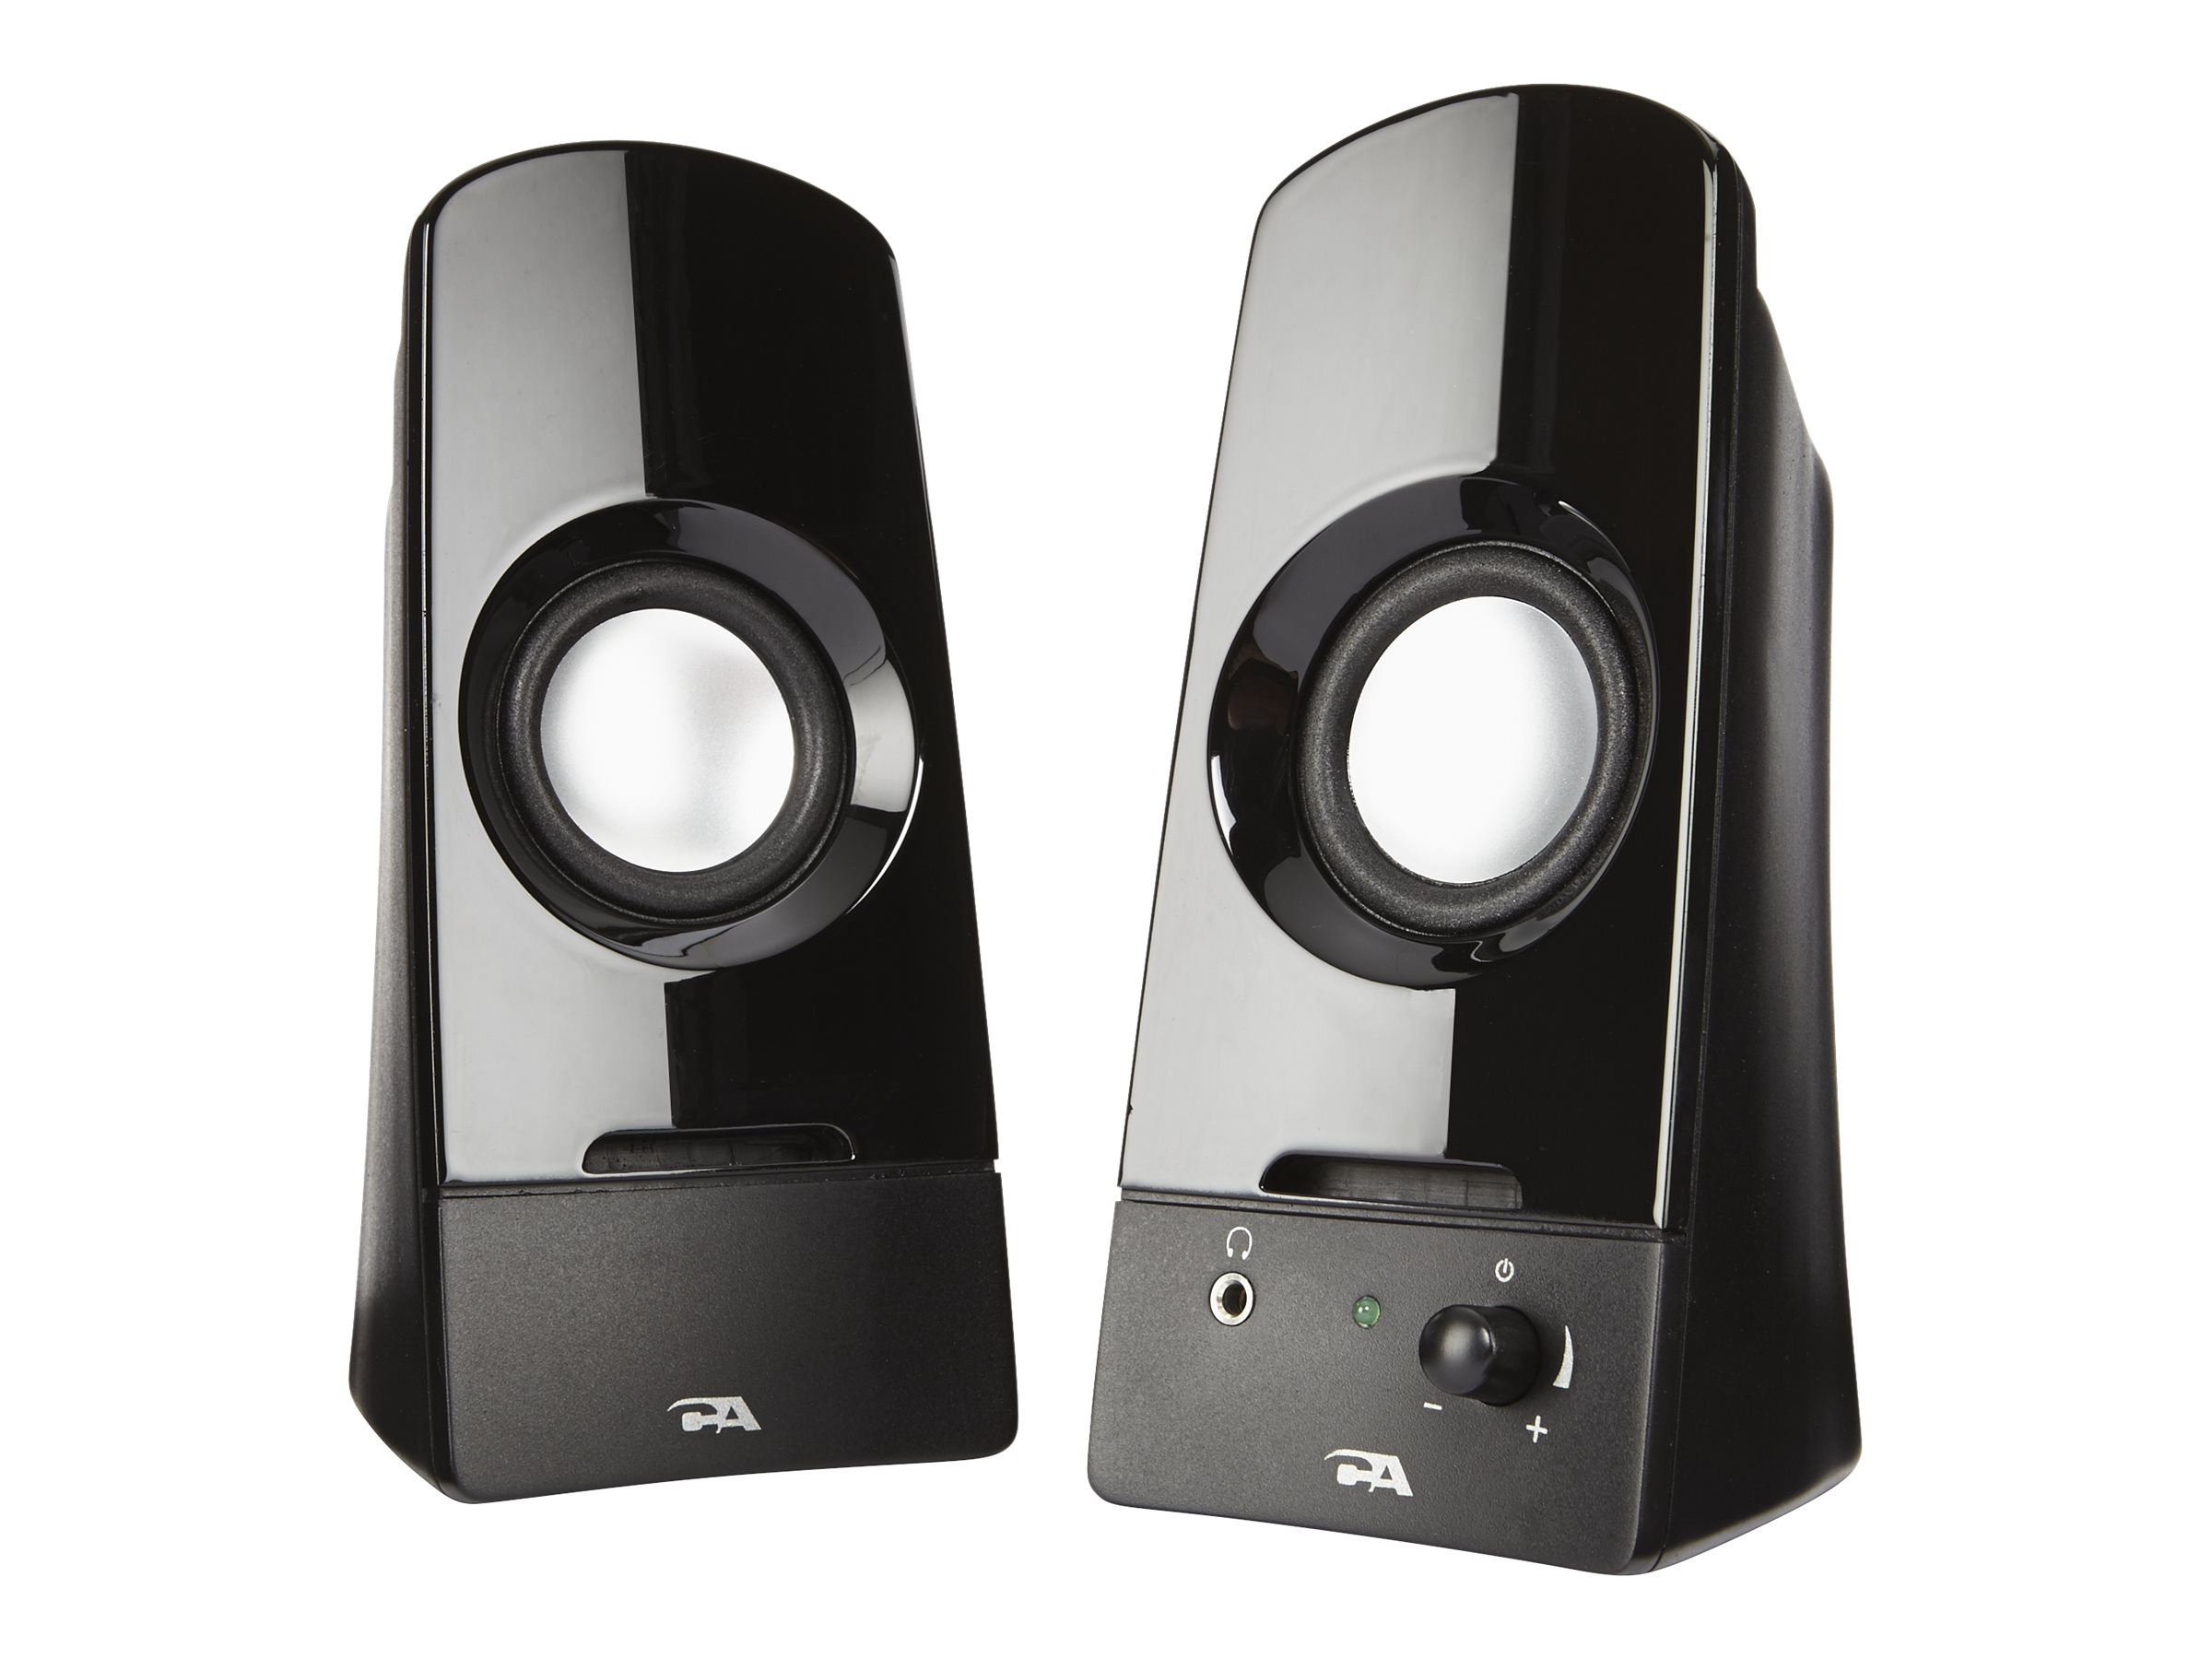 Cyber Acoustics CURVE Series CA-2050 Sonic - speakers - for PC